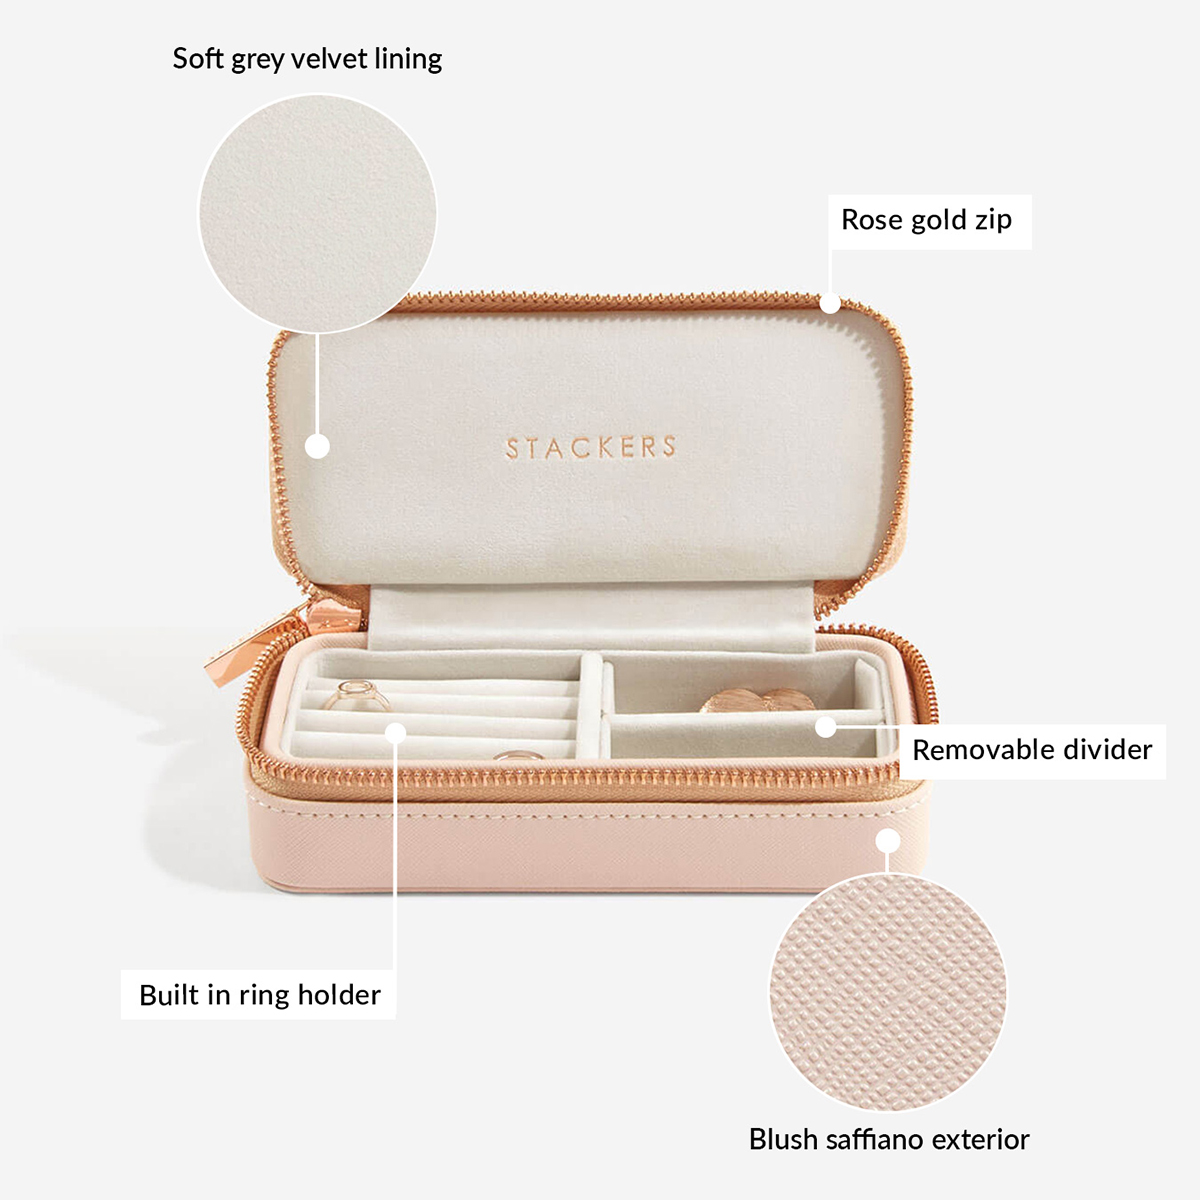 Stackers Travel Jewelry Case | The Container Store